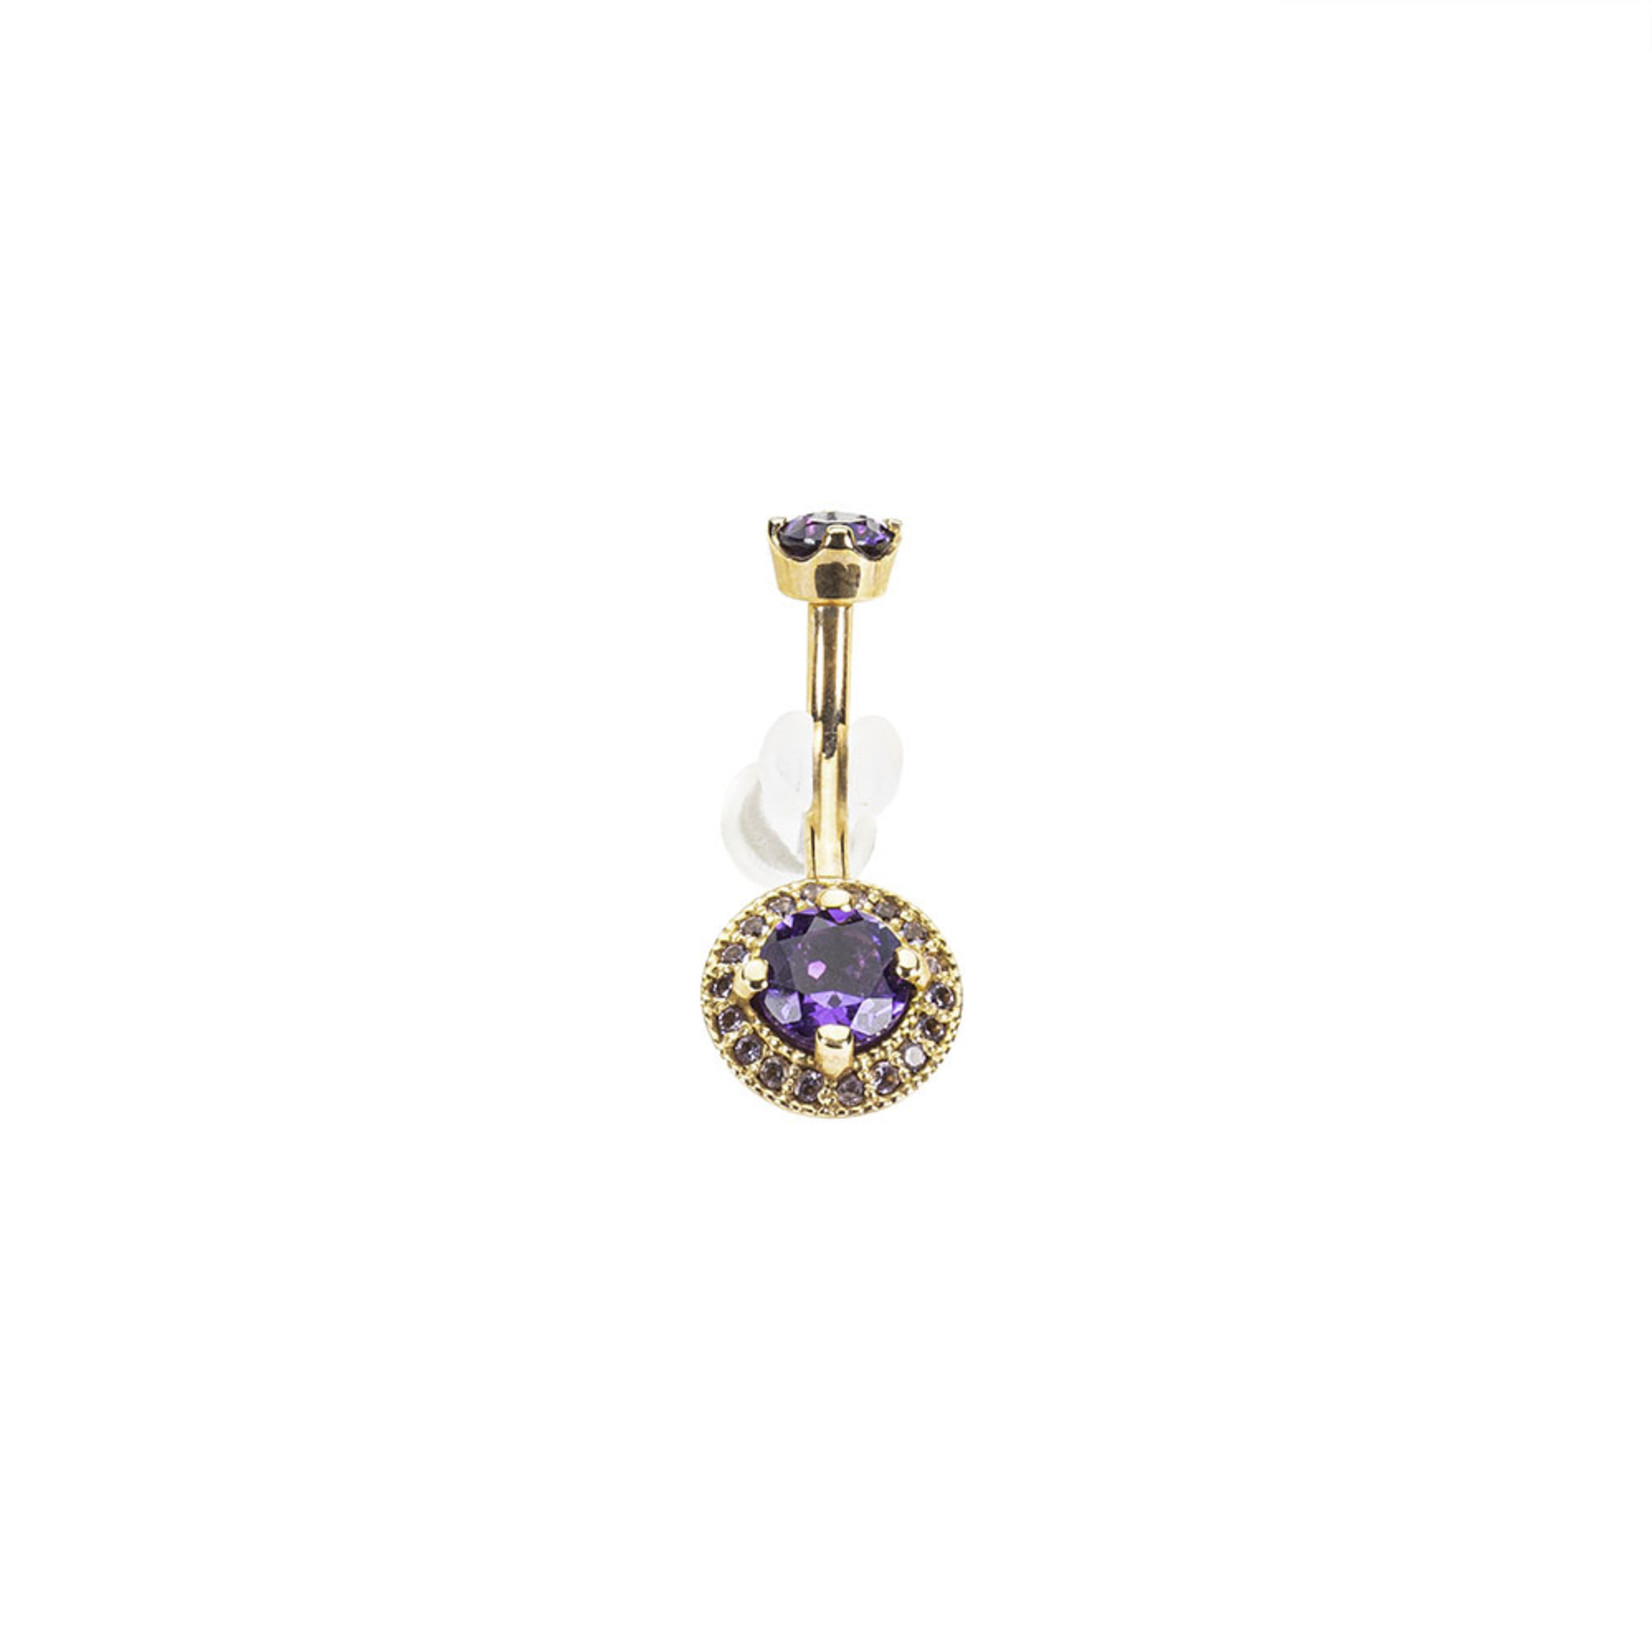 BVLA BVLA 14g 3/8 rose gold "Halo" navel curve with 4.0 prong set Amethyst top and a 5.0 amethyst center surrounded by 1.0 light amethyst